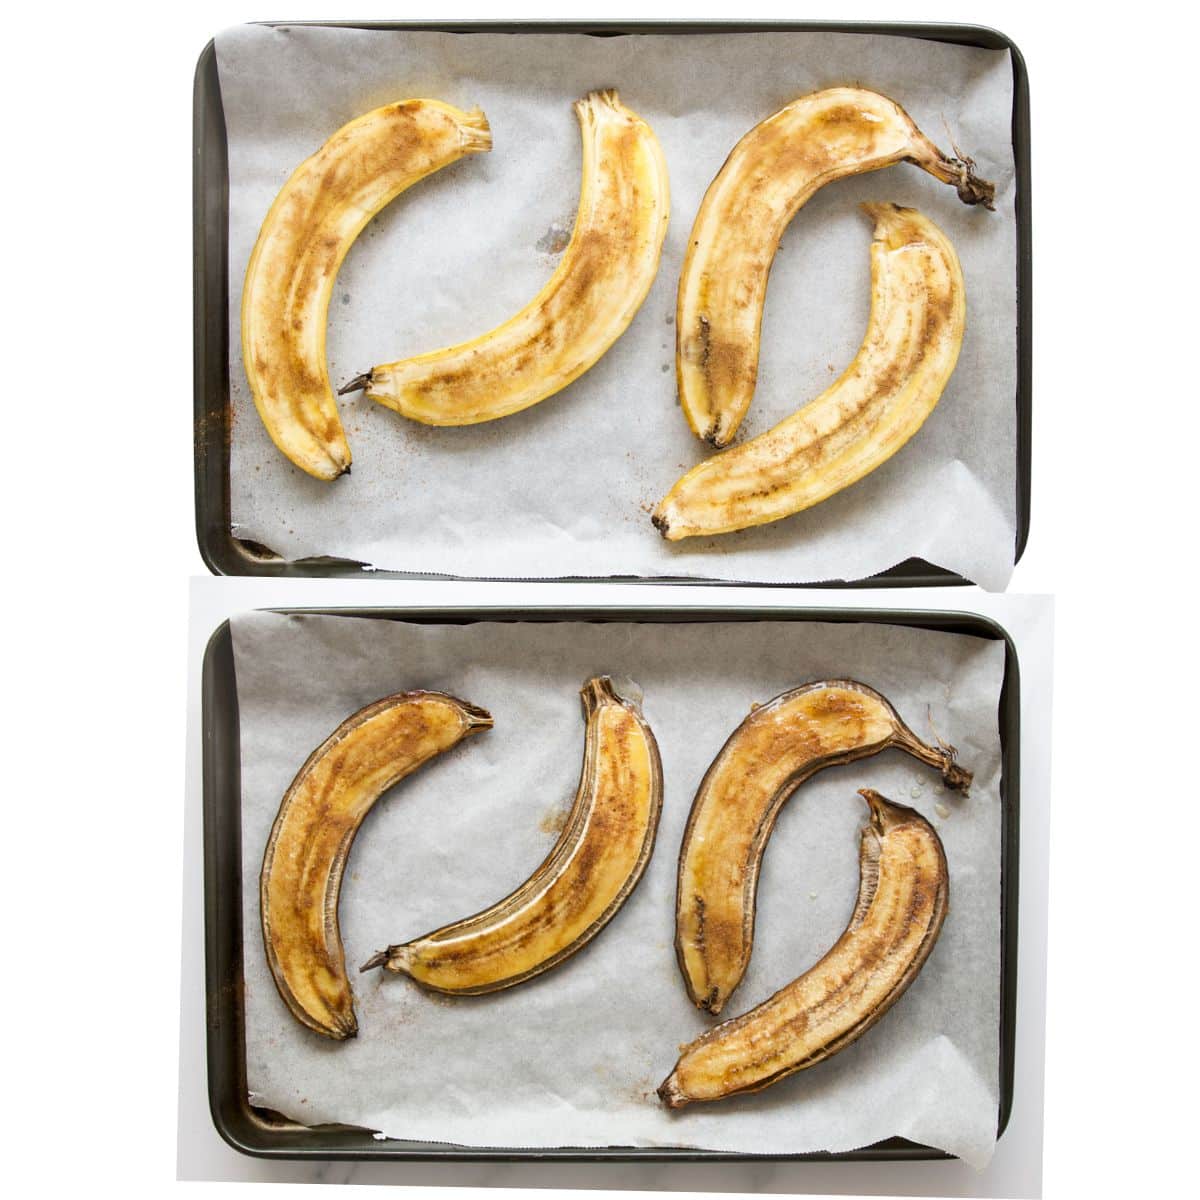 Cut Banana on Baking Trays Before and After Baking.